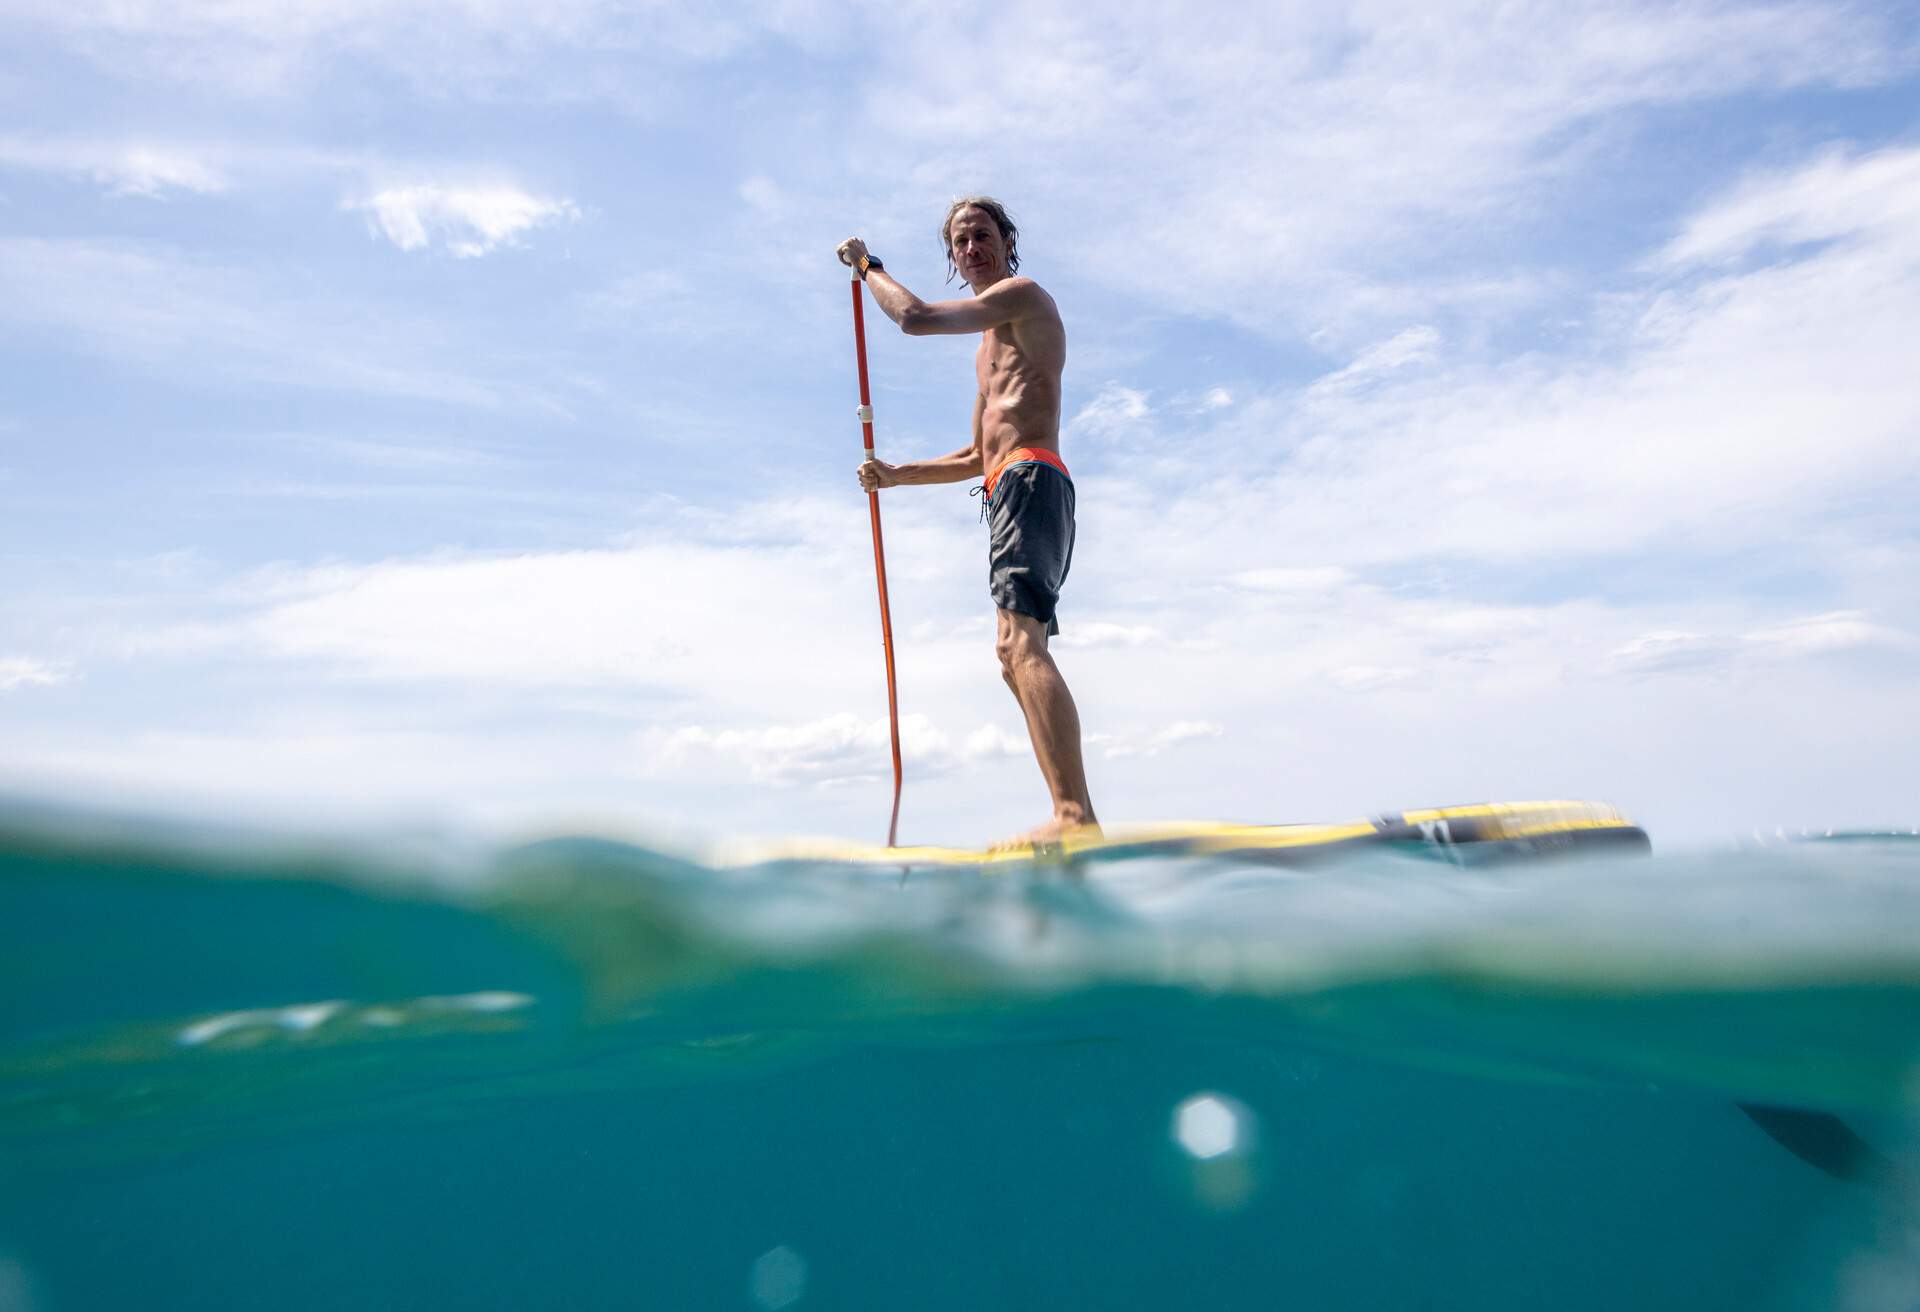 Taken between water and sky, male paddling on SUP board with cristal clear water below.